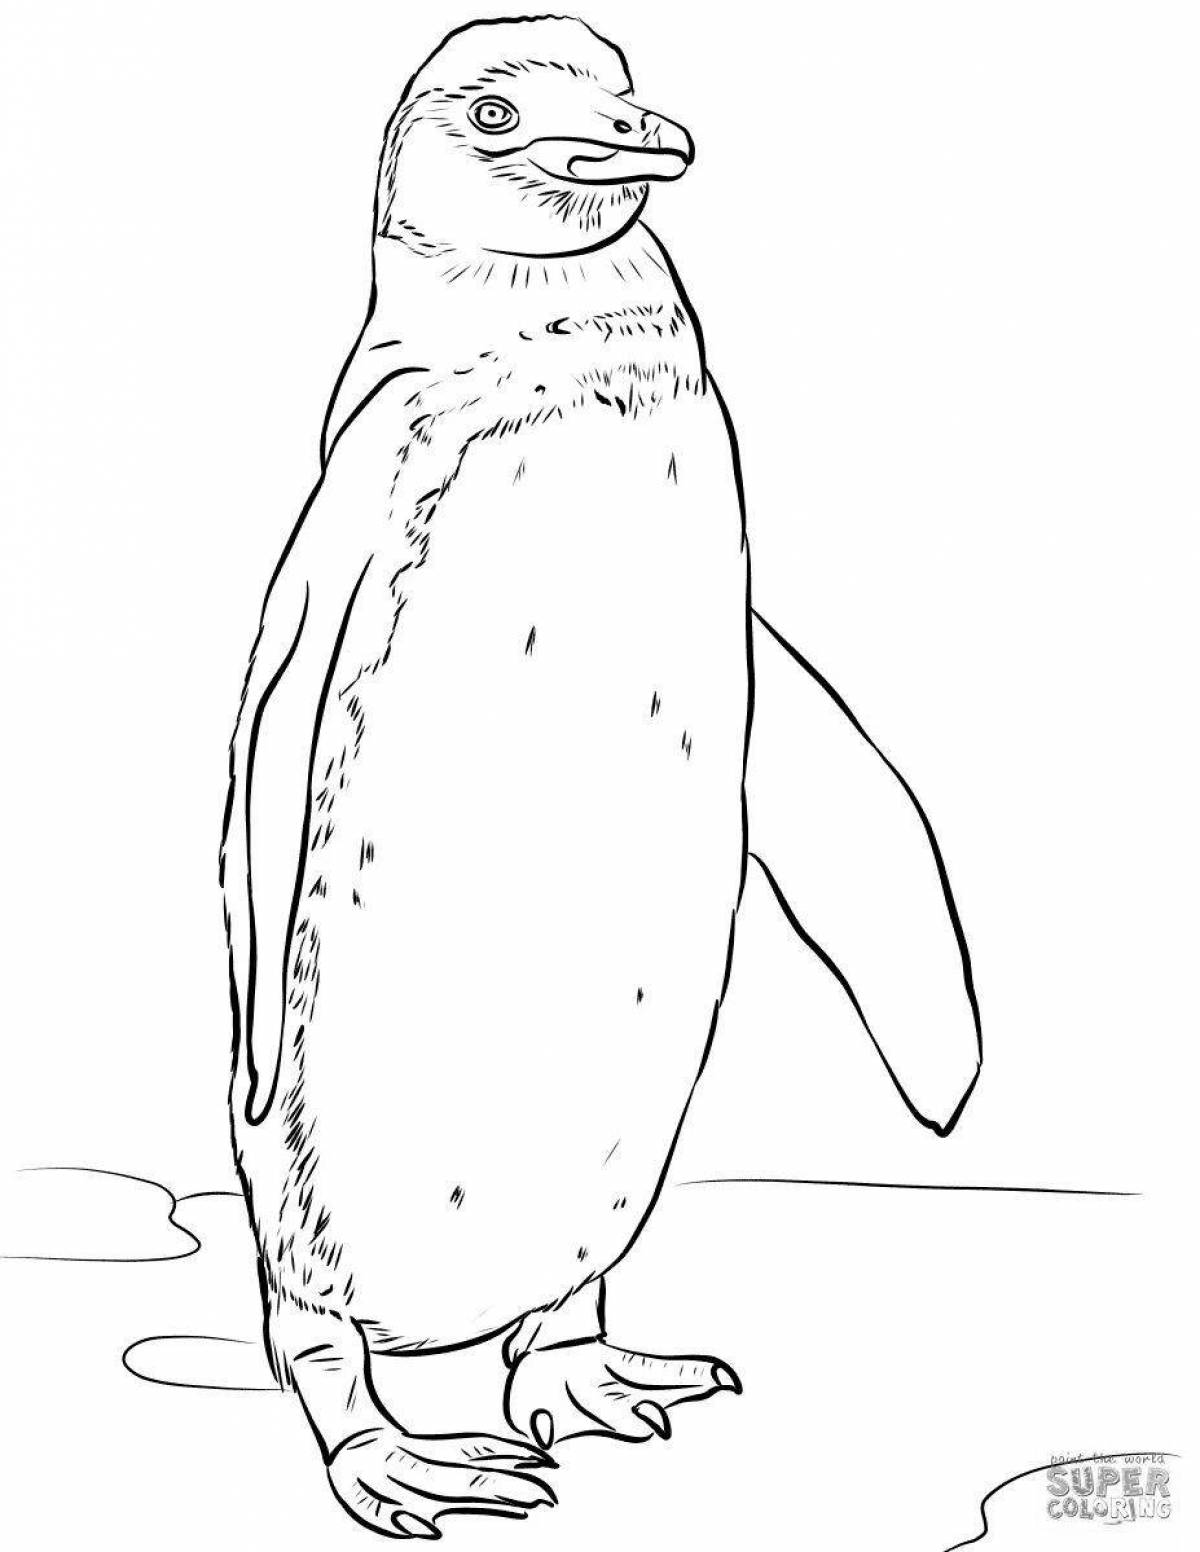 Rampant penguin and polar bear coloring page